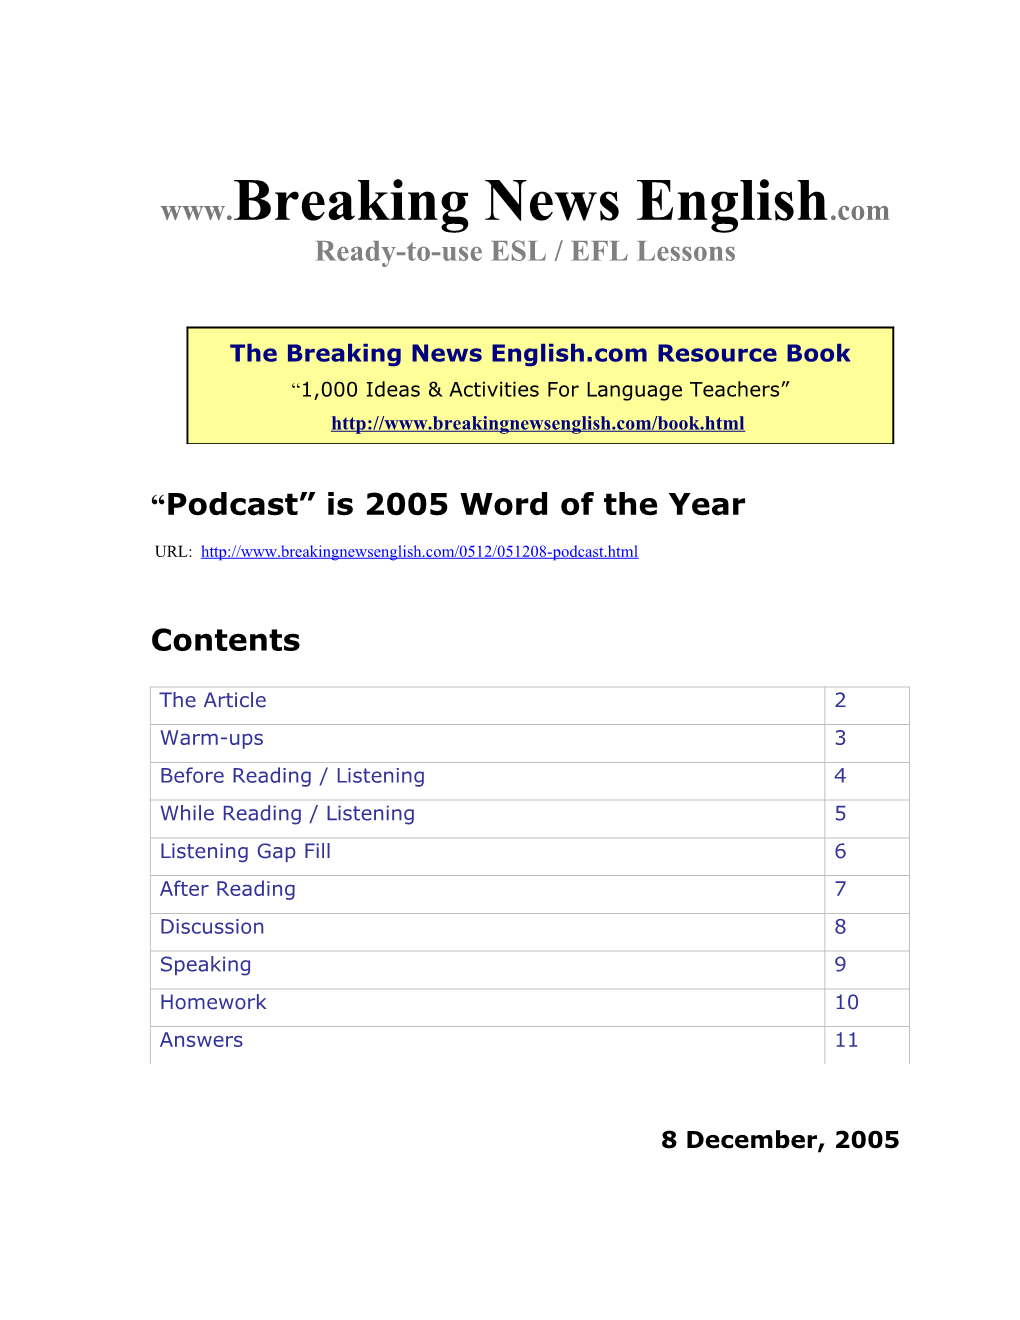 Podcast Is 2005 Word of the Year